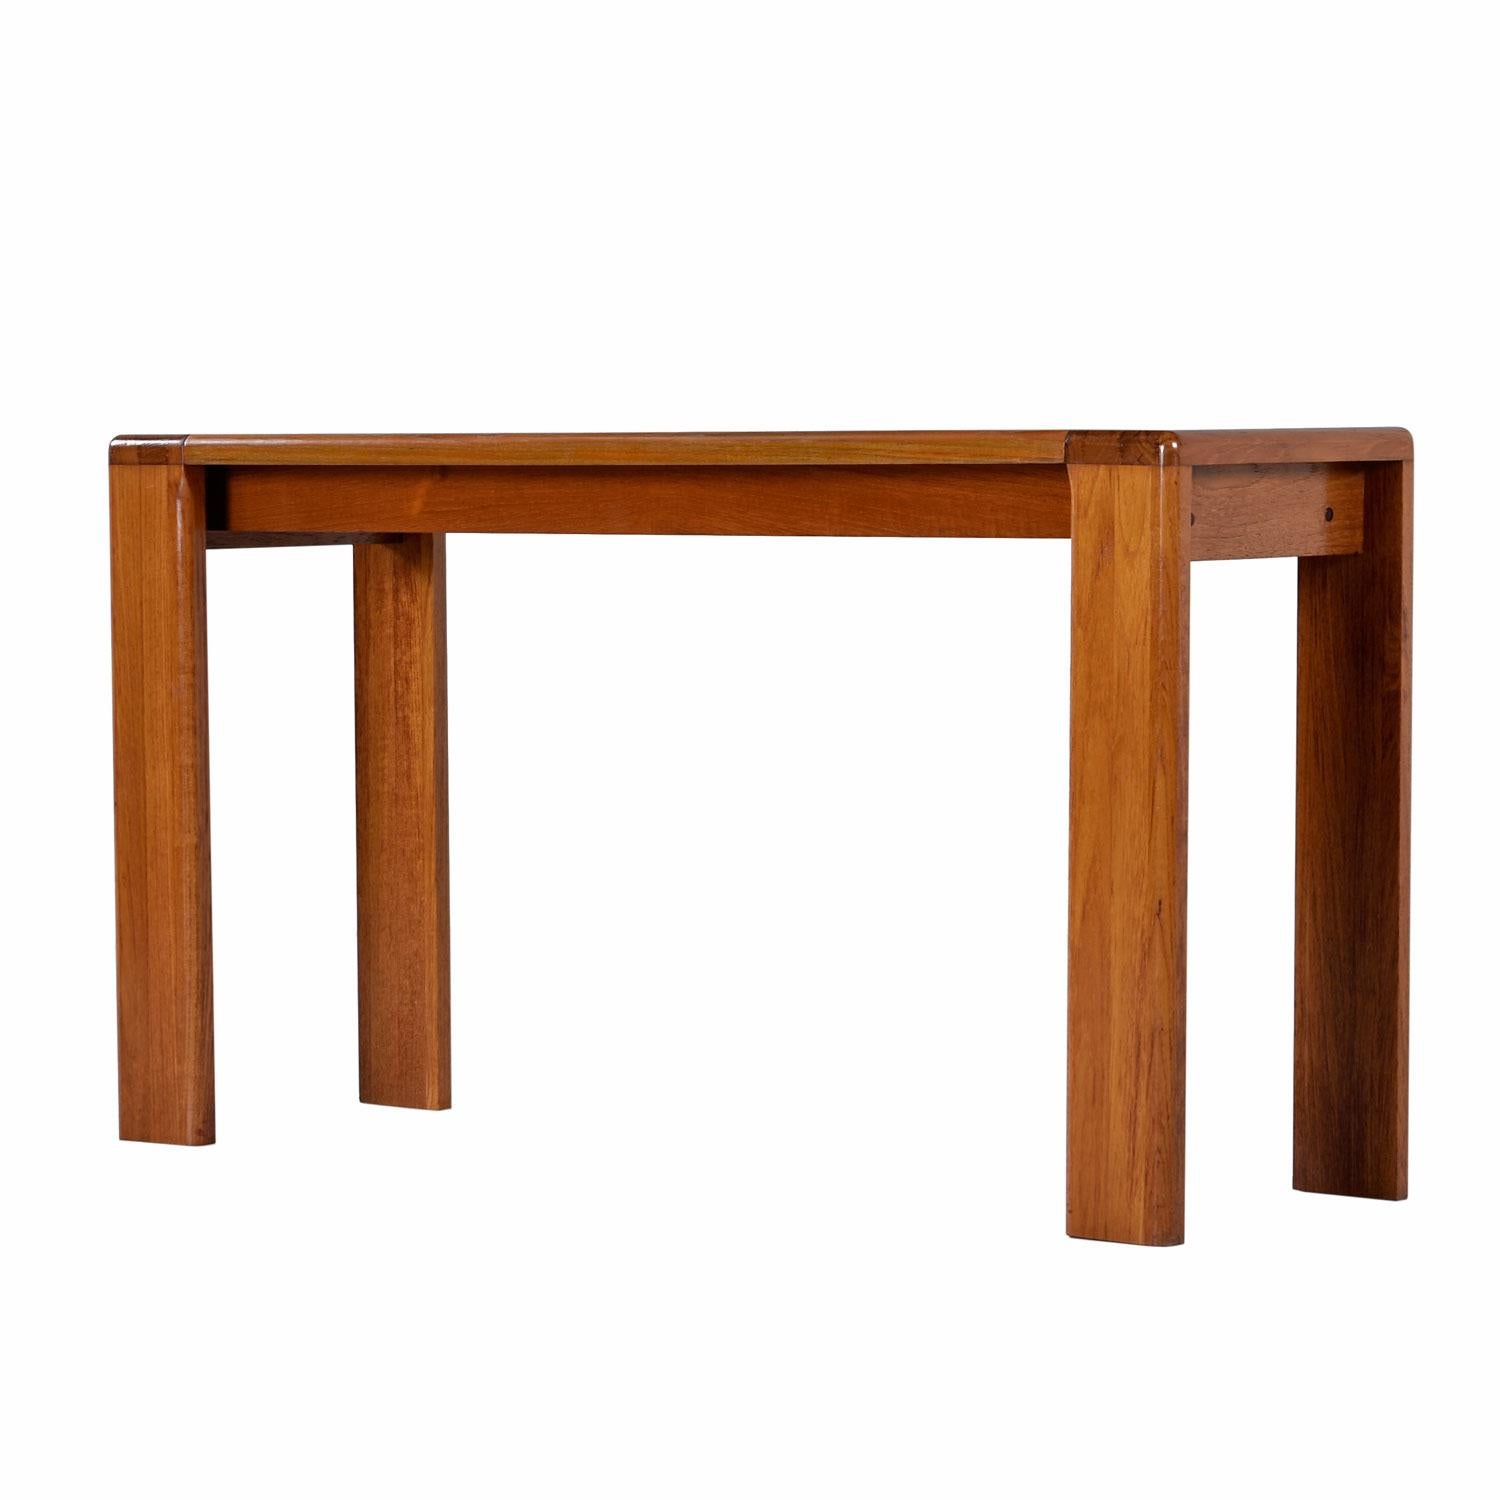 Vintage solid teak console table constructed of thick bands of teak planks laid side by side to create a solid tabletop surface. The Minimalist form adheres to the Danish Modern aesthetic. The legs are also solid teak. Also ideal for use as a sofa